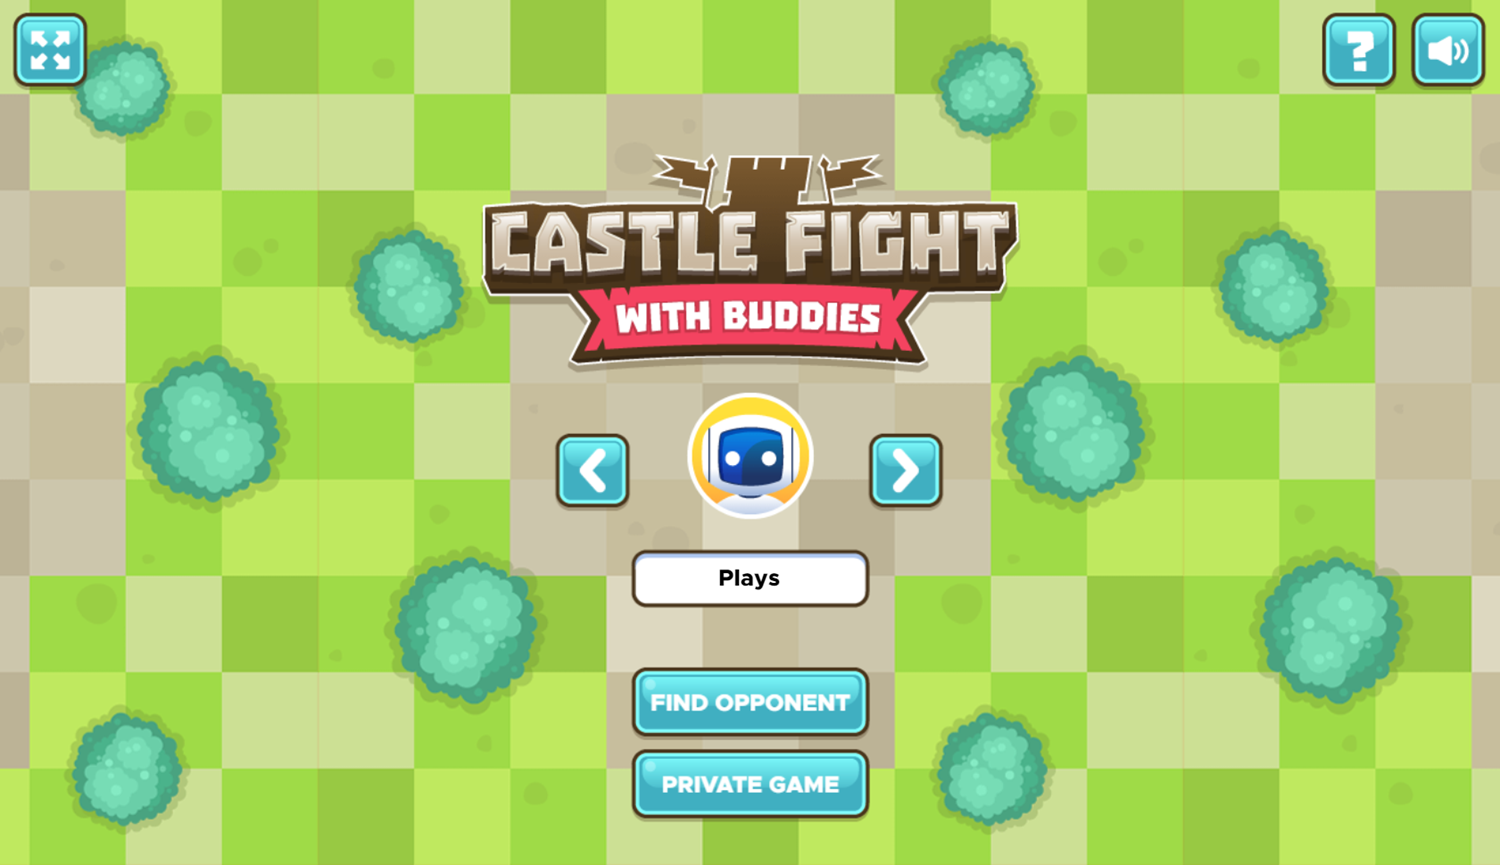 Castle Fight With Buddies Game Welcome Screen Screenshot.